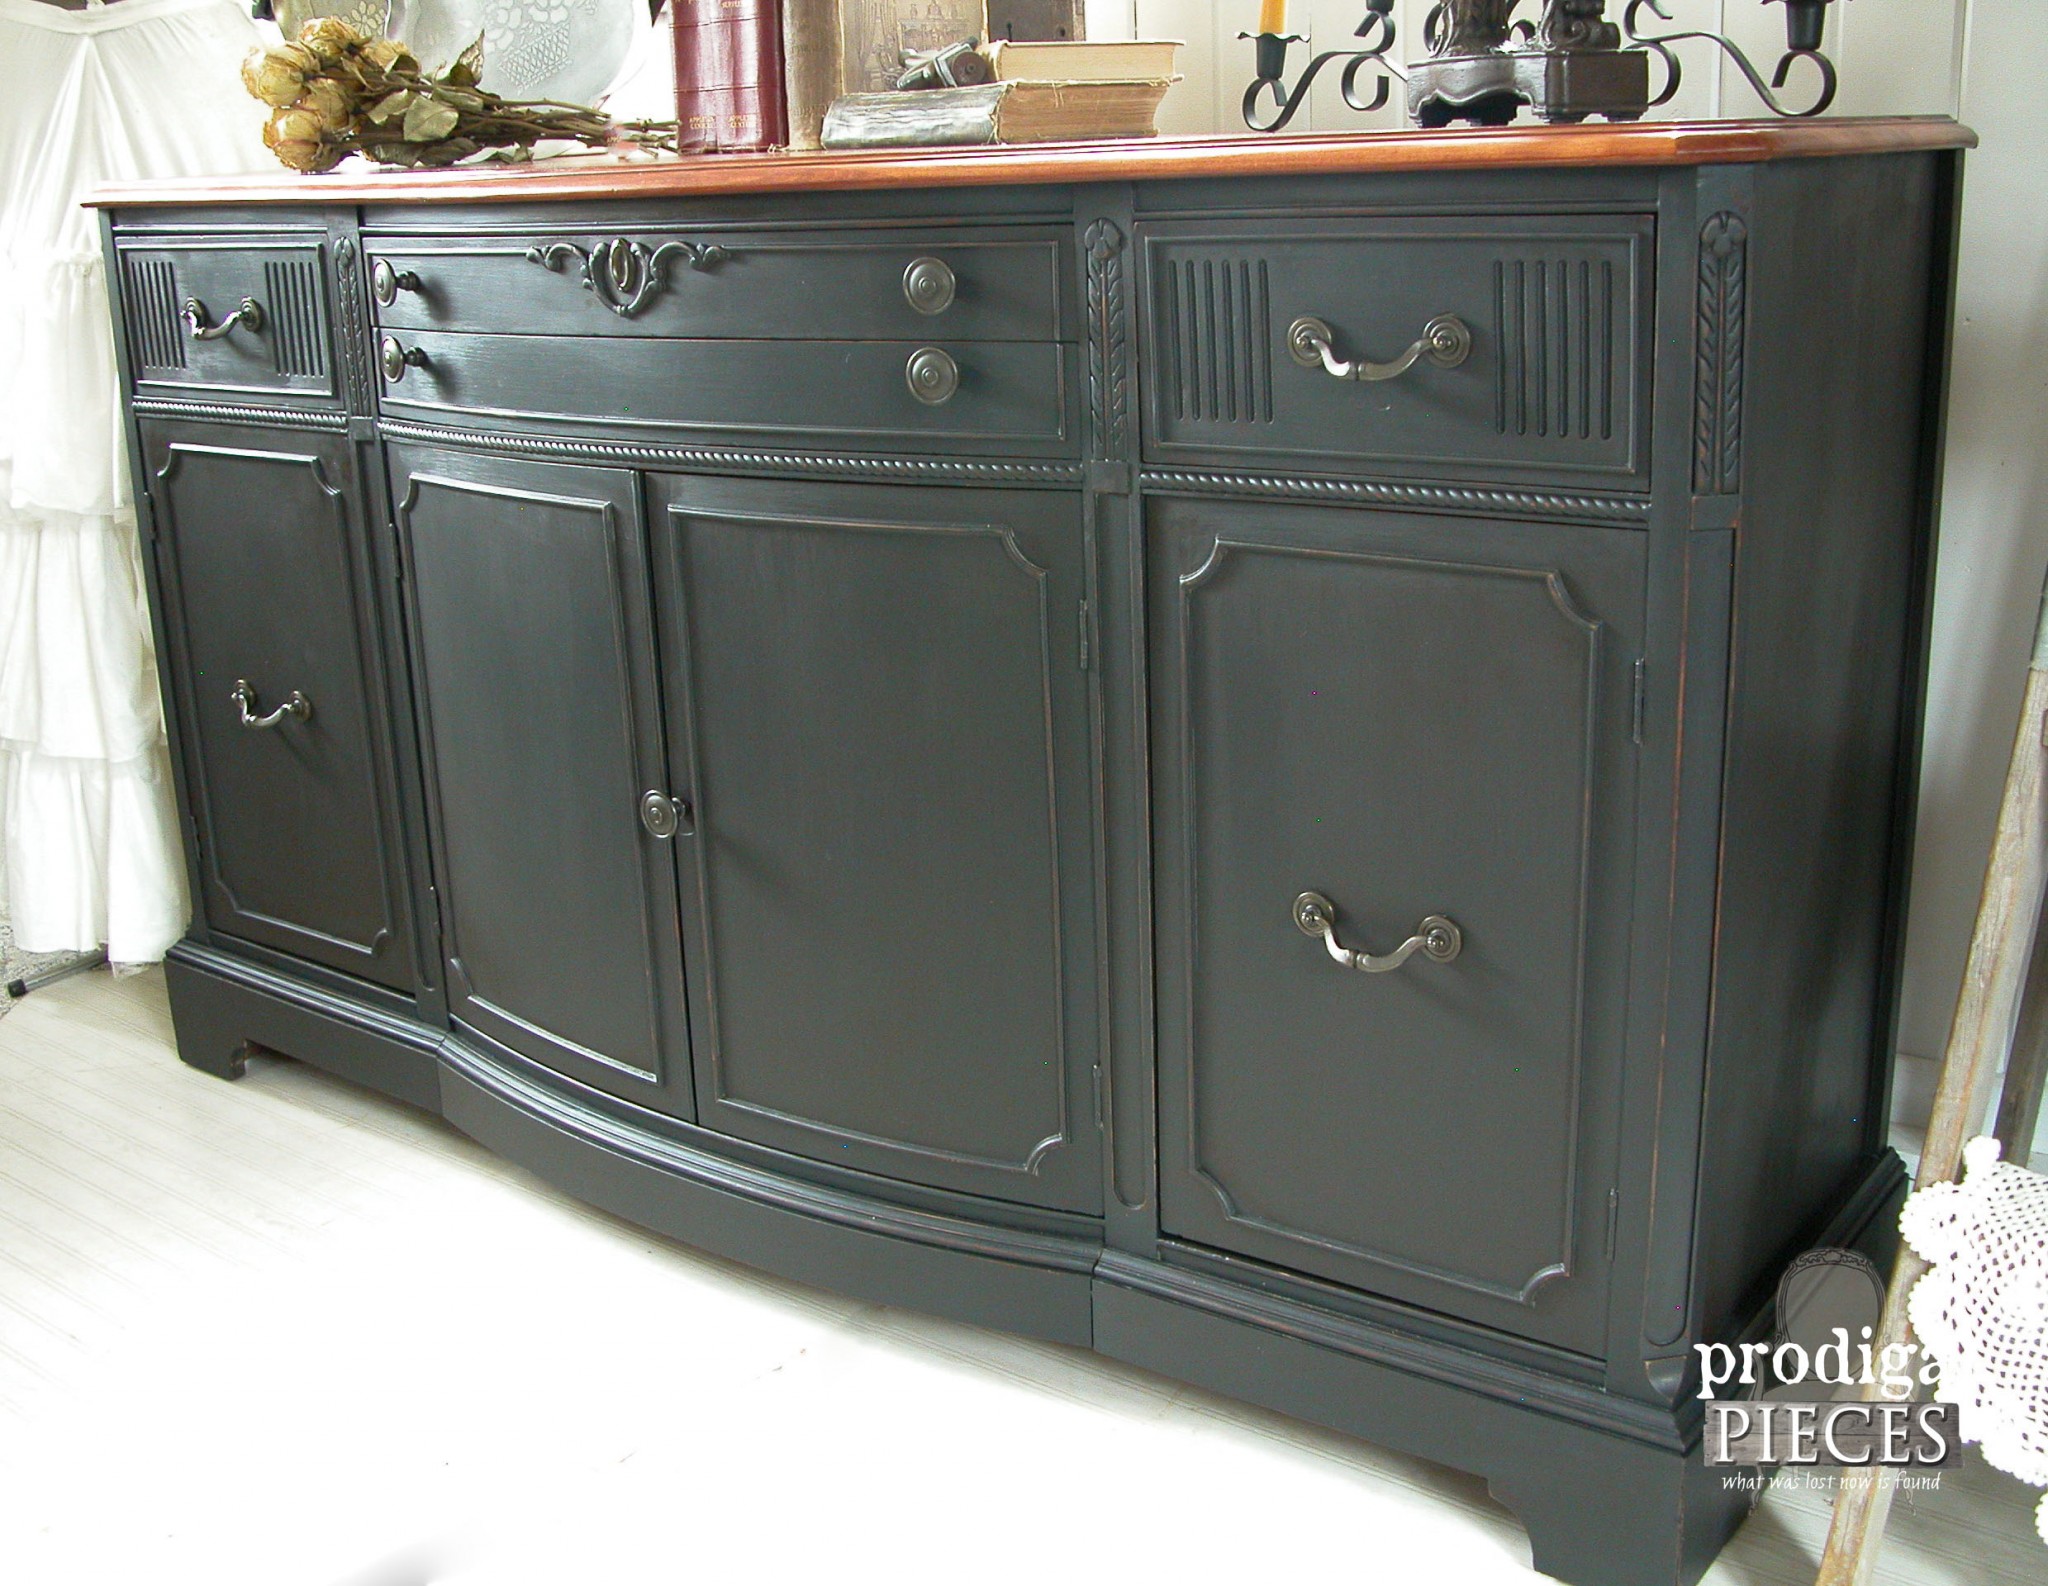 Side View of Vintage Black Buffet by Prodigal Pieces | www.prodigalpieces.com